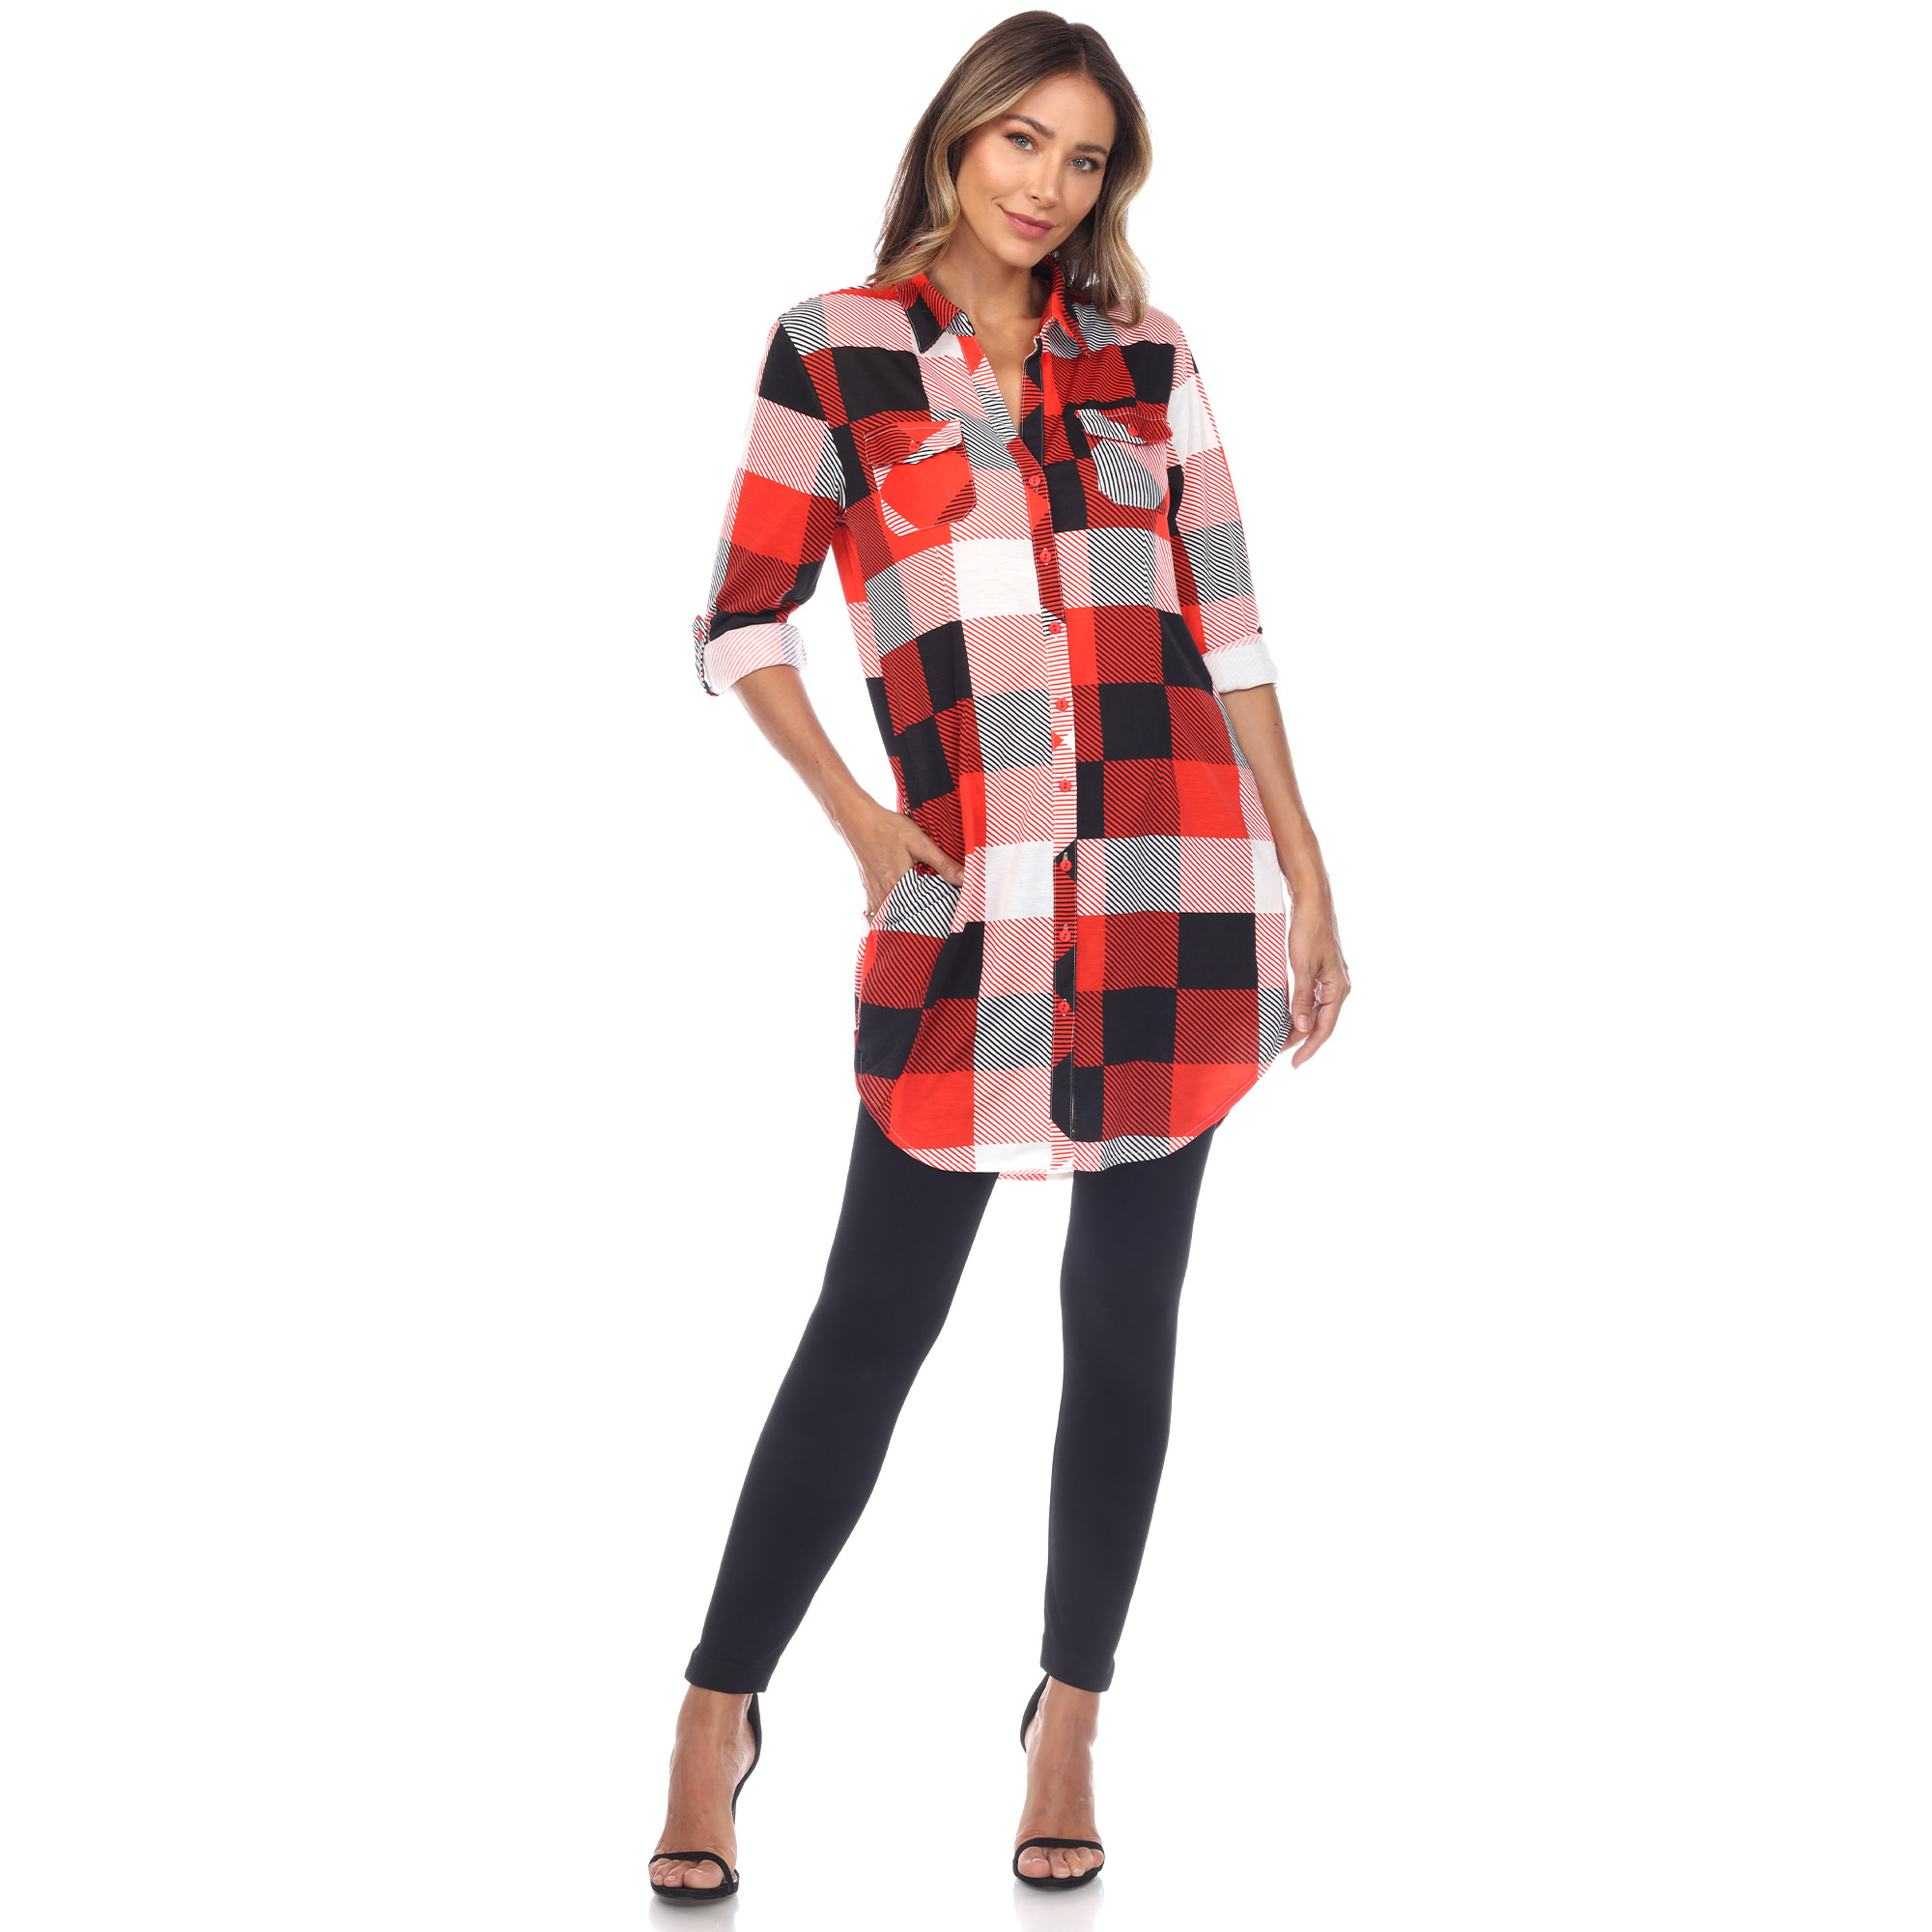 White Mark Women's Stretchy Buffalo Plaid Tunic Top - Red/Black, Large